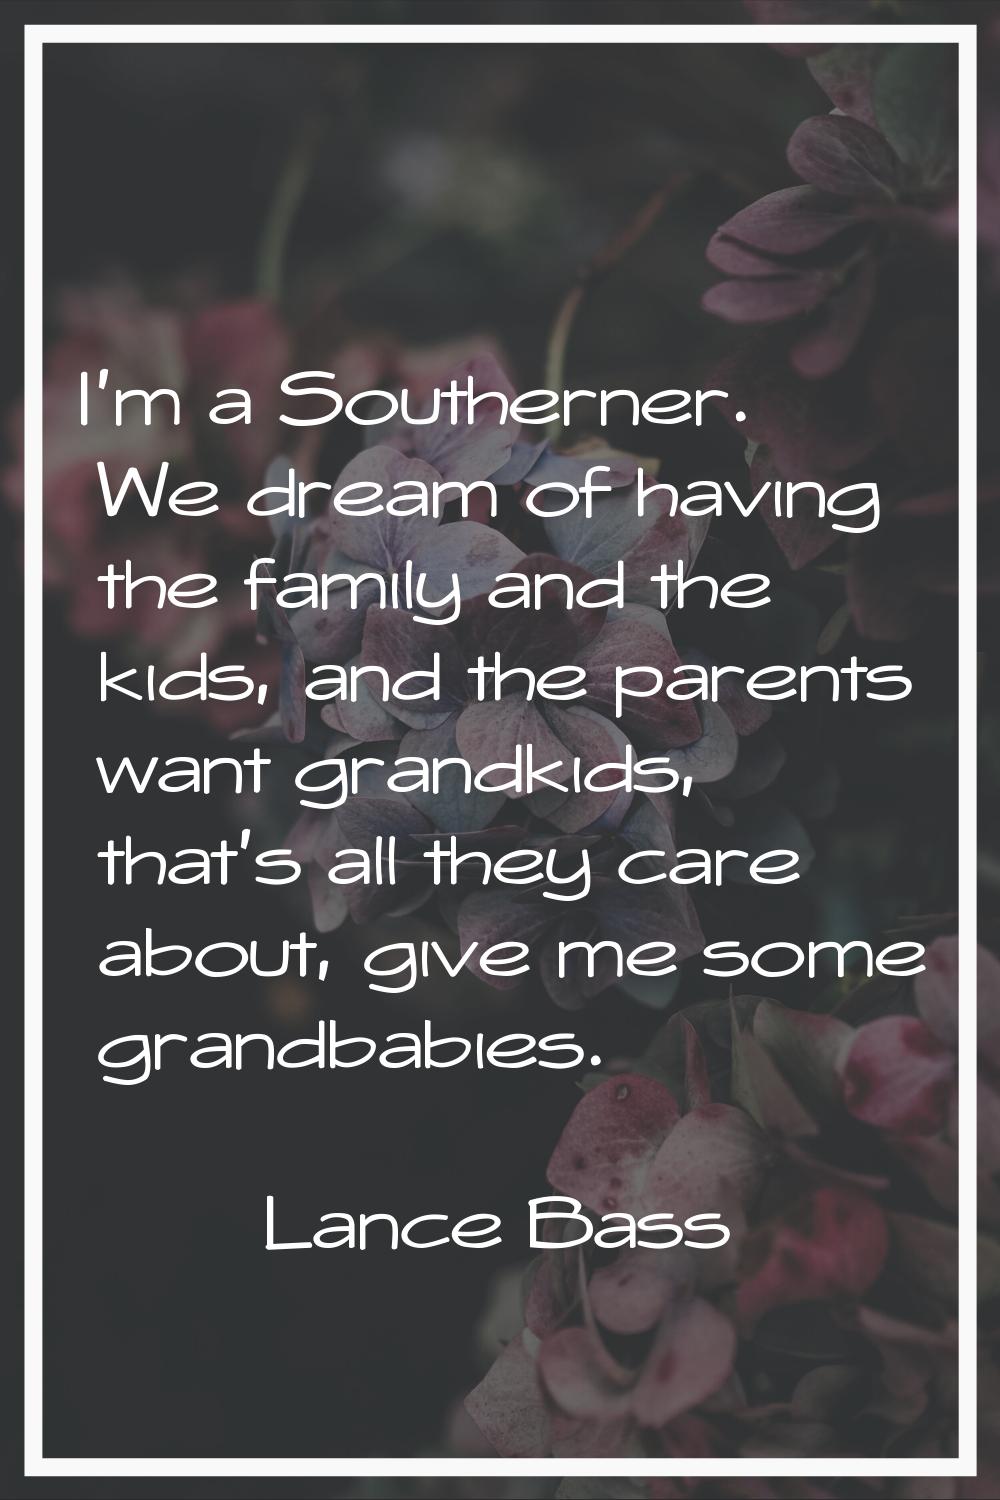 I'm a Southerner. We dream of having the family and the kids, and the parents want grandkids, that'